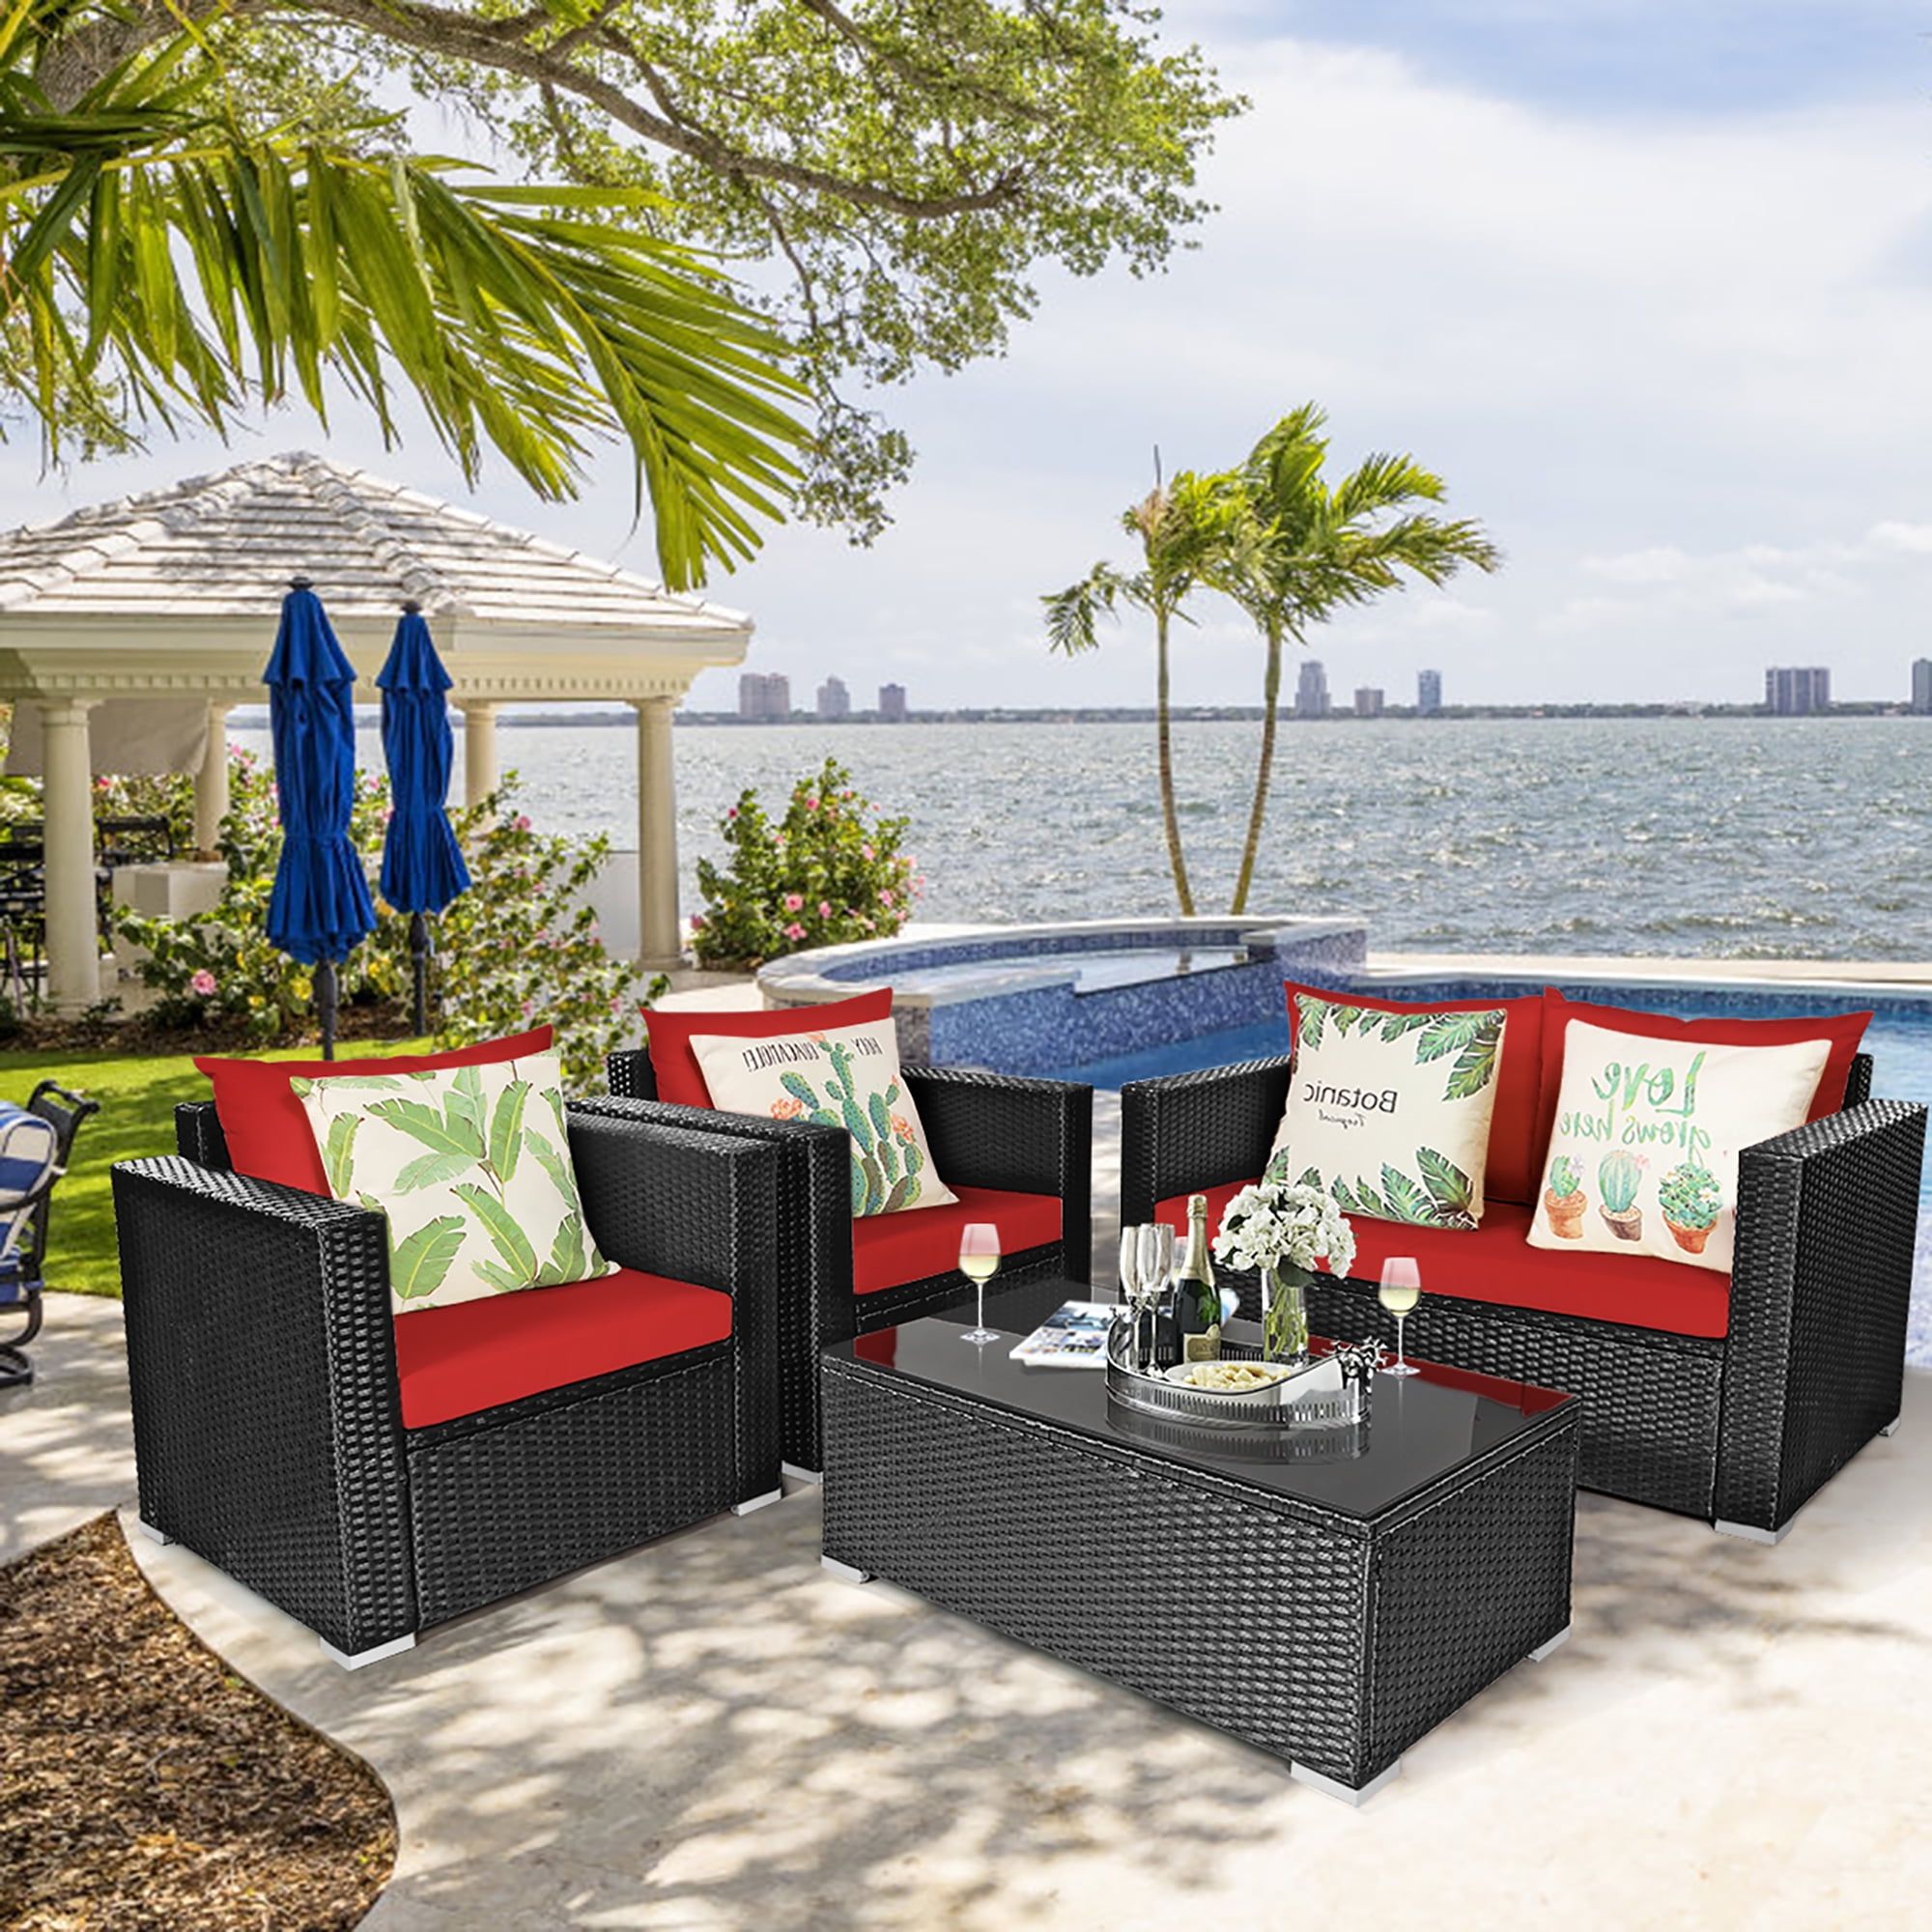 Costway 4pcs Patio Rattan Furniture Set Cushioned Sofa Chair Coffee Inside 4pcs Rattan Patio Coffee Tables (View 5 of 15)